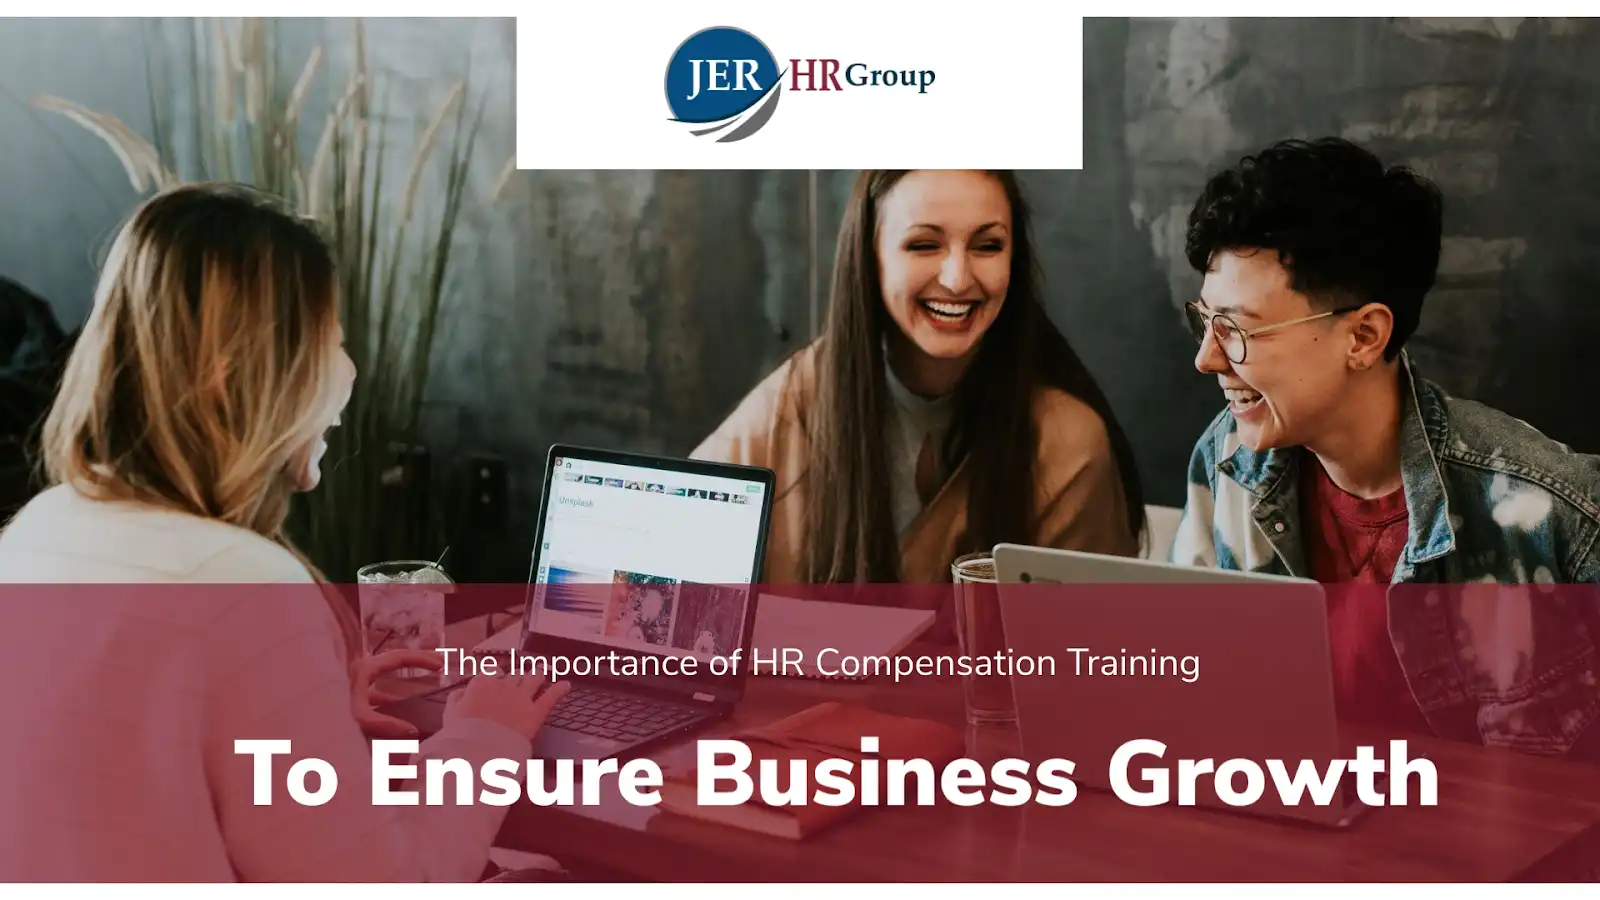 HR Compensation Training to Ensure Business Growth